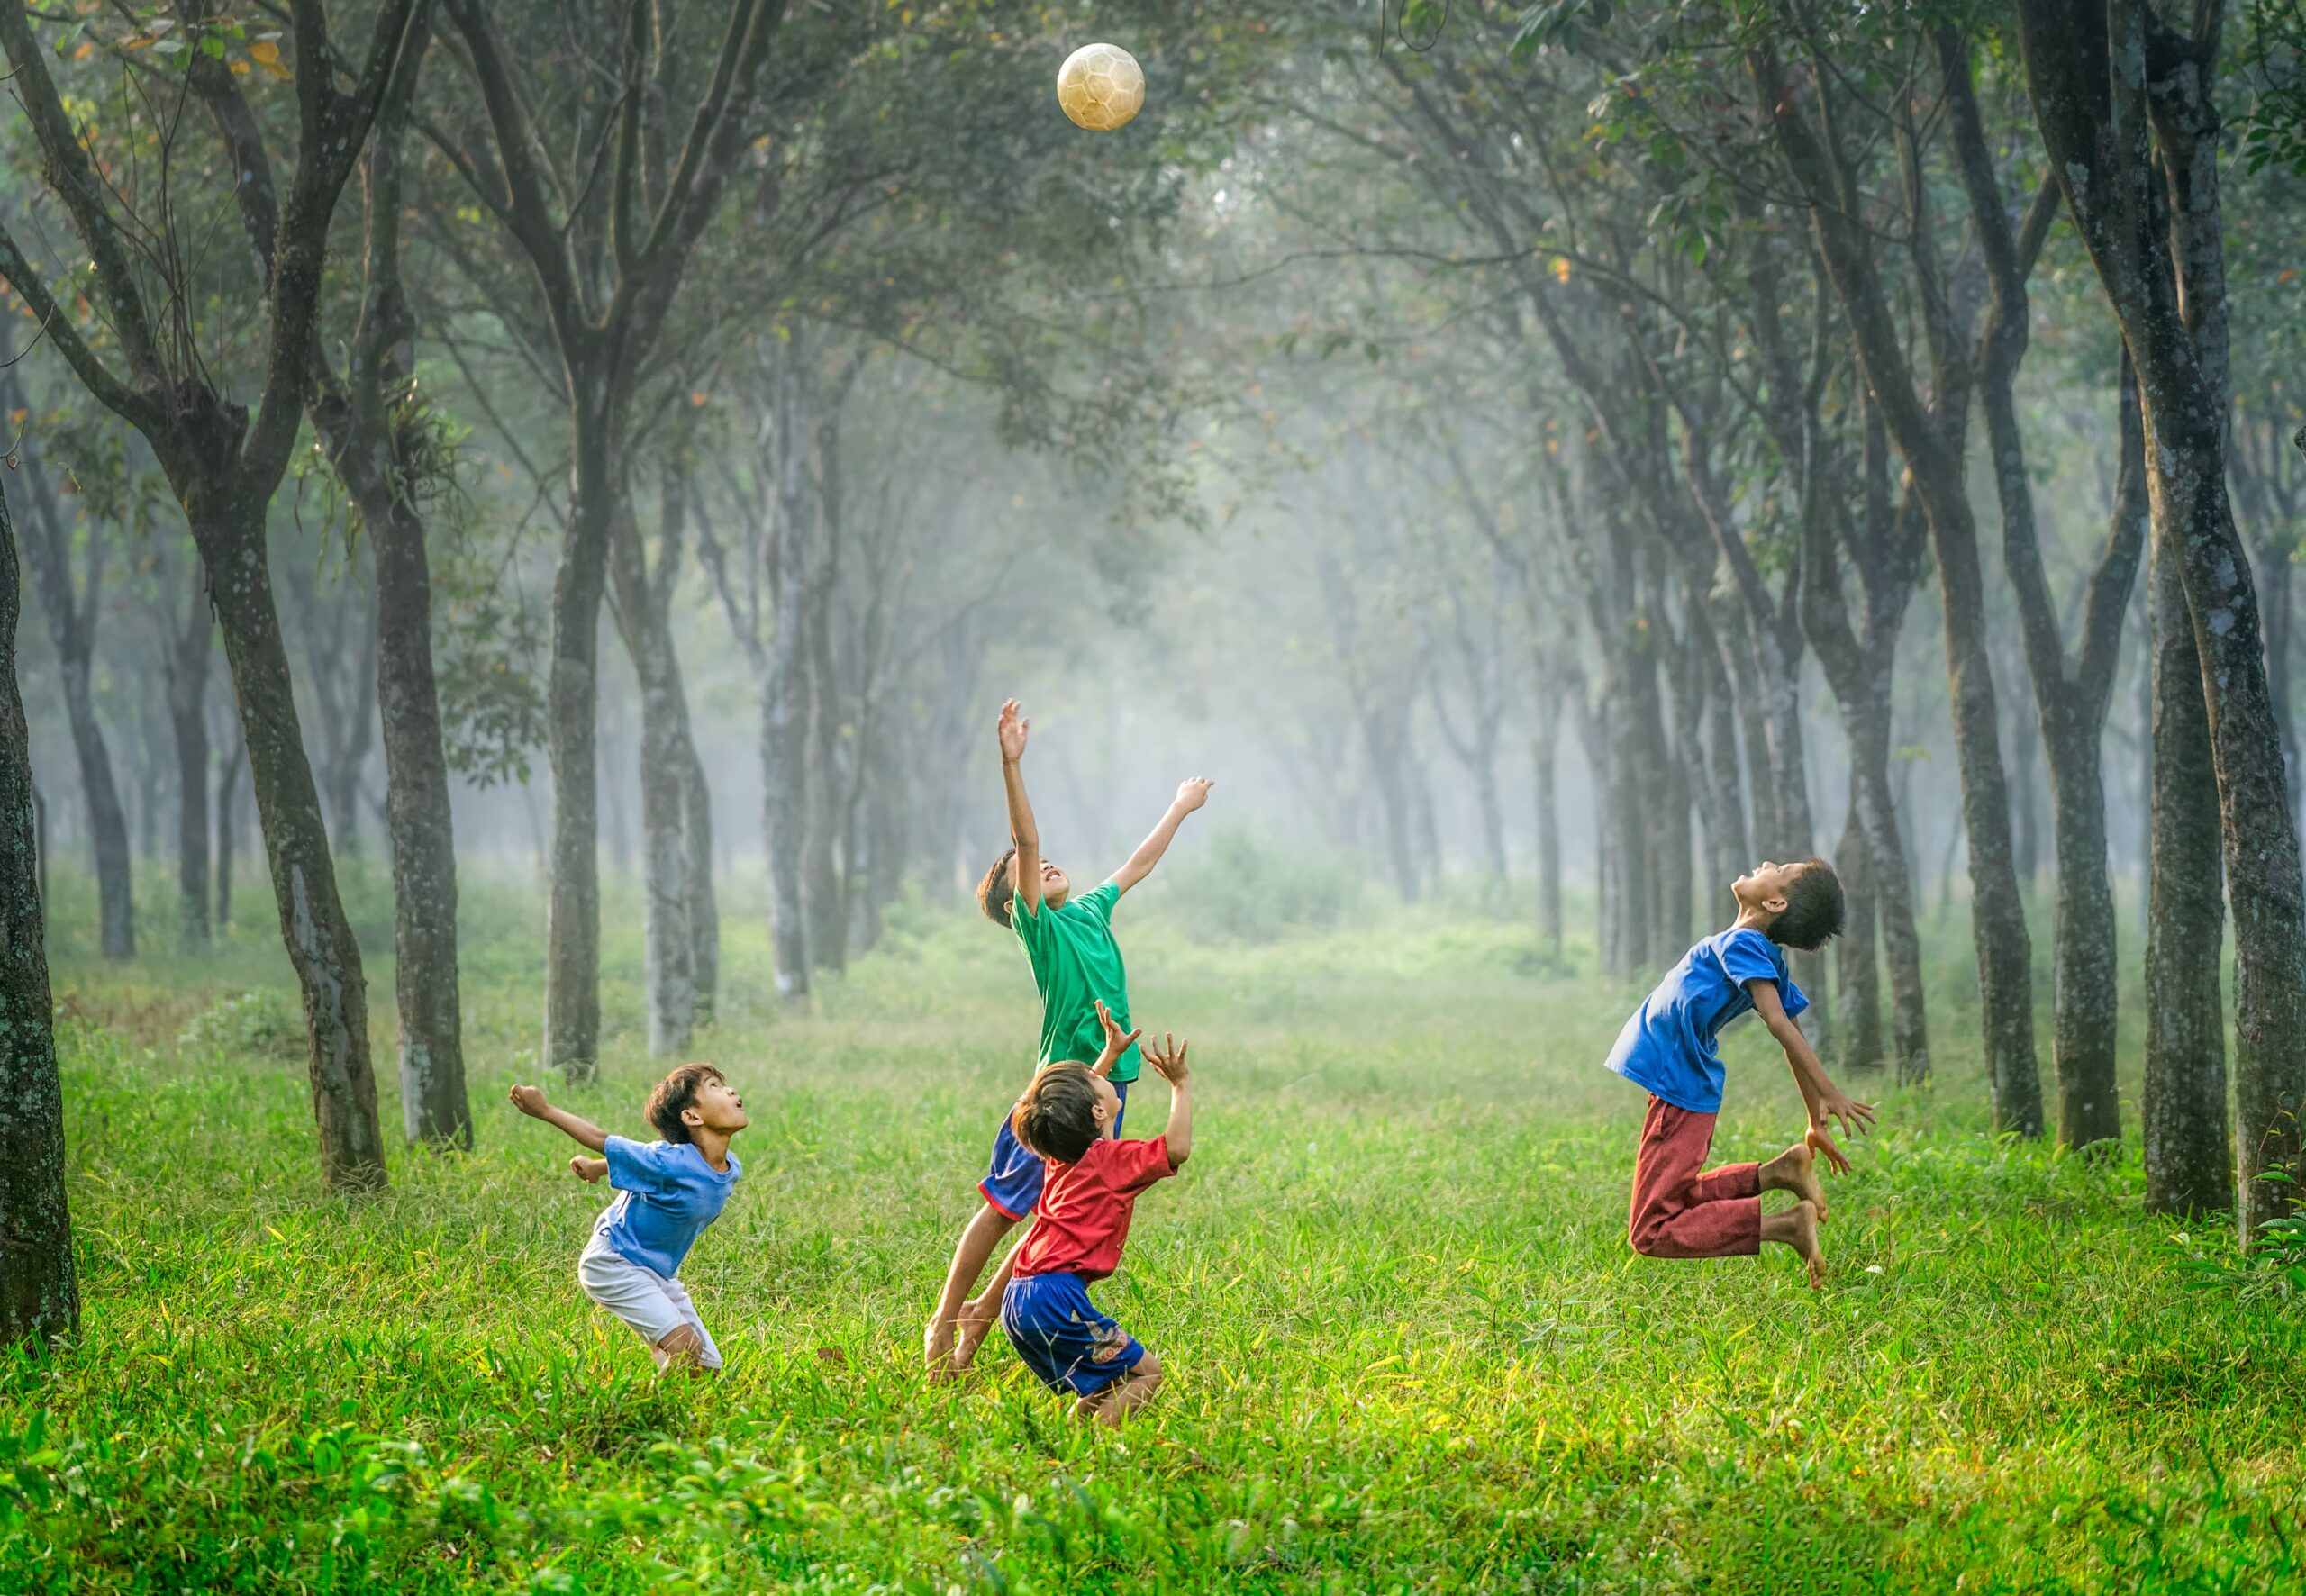 Children playing in an environment full of trees